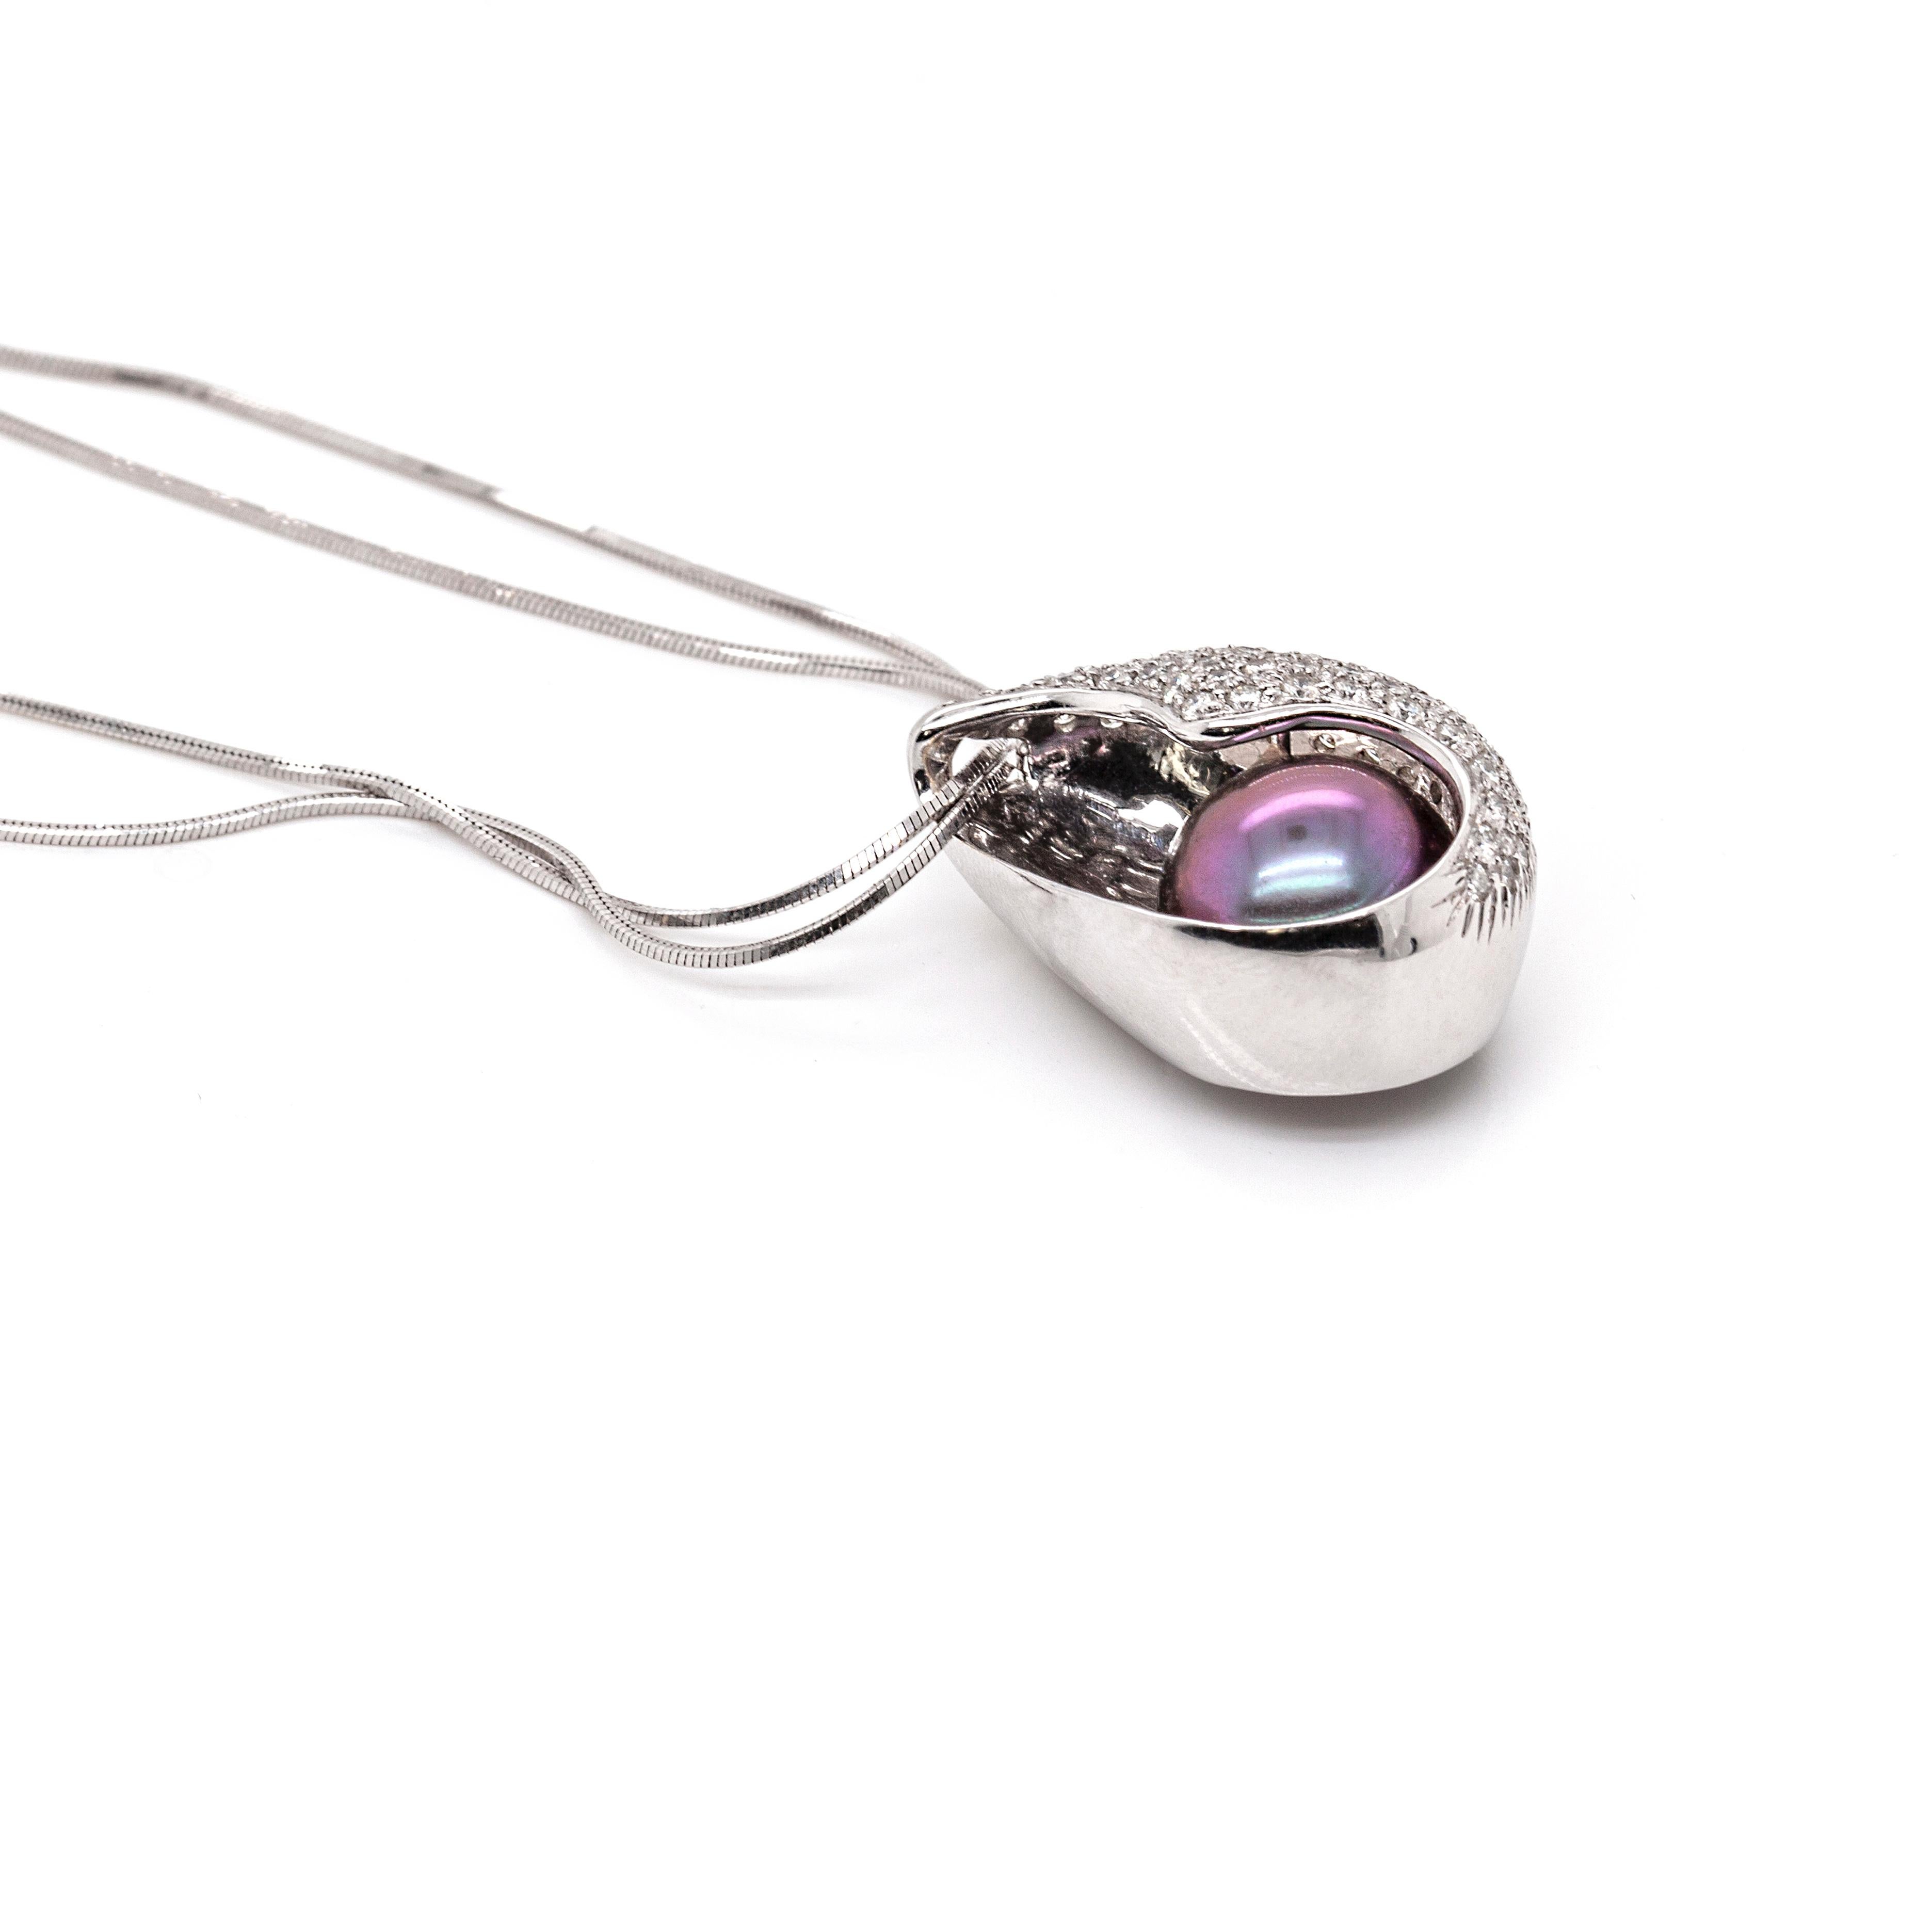 This is a striking Italian-made 18ct white gold necklace, featuring a gorgeous black pearl cradled in a pavé set conch shaped pendant. The pendant boasts approximately 0.65 carats of round brilliant cut diamonds. The back of the pendant is left